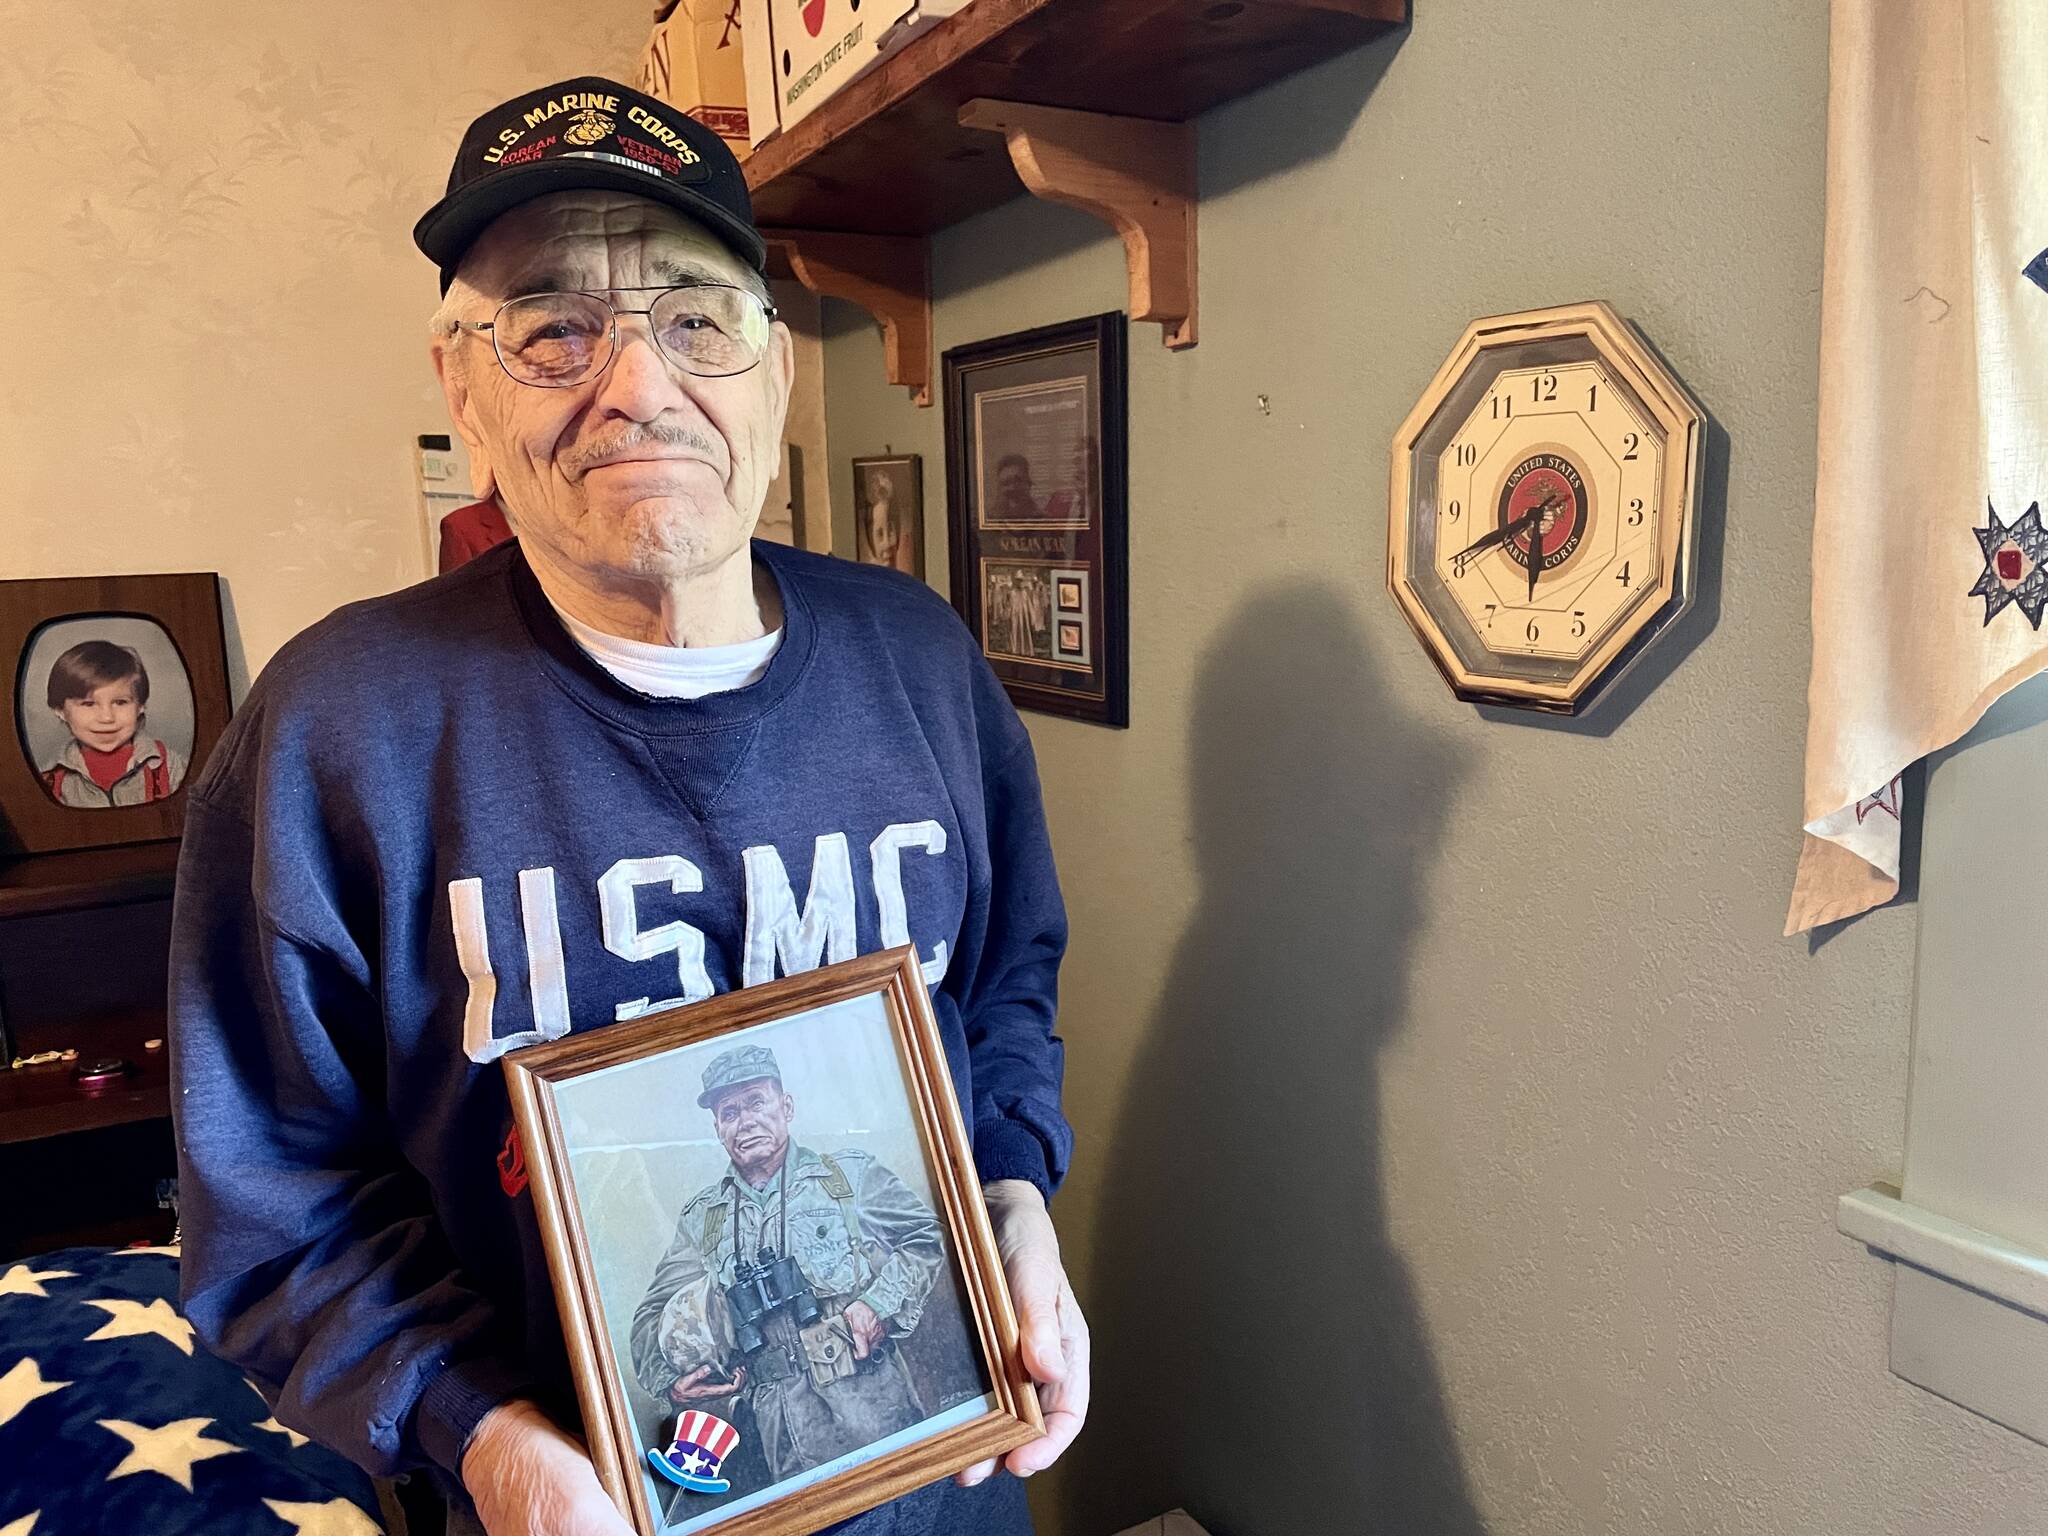 Jim Evans, one of the Chosin Few, poses in his residence with a picture of Marine Corps legend “Chesty” Puller. (Michael S. Lockett / The Daily World)